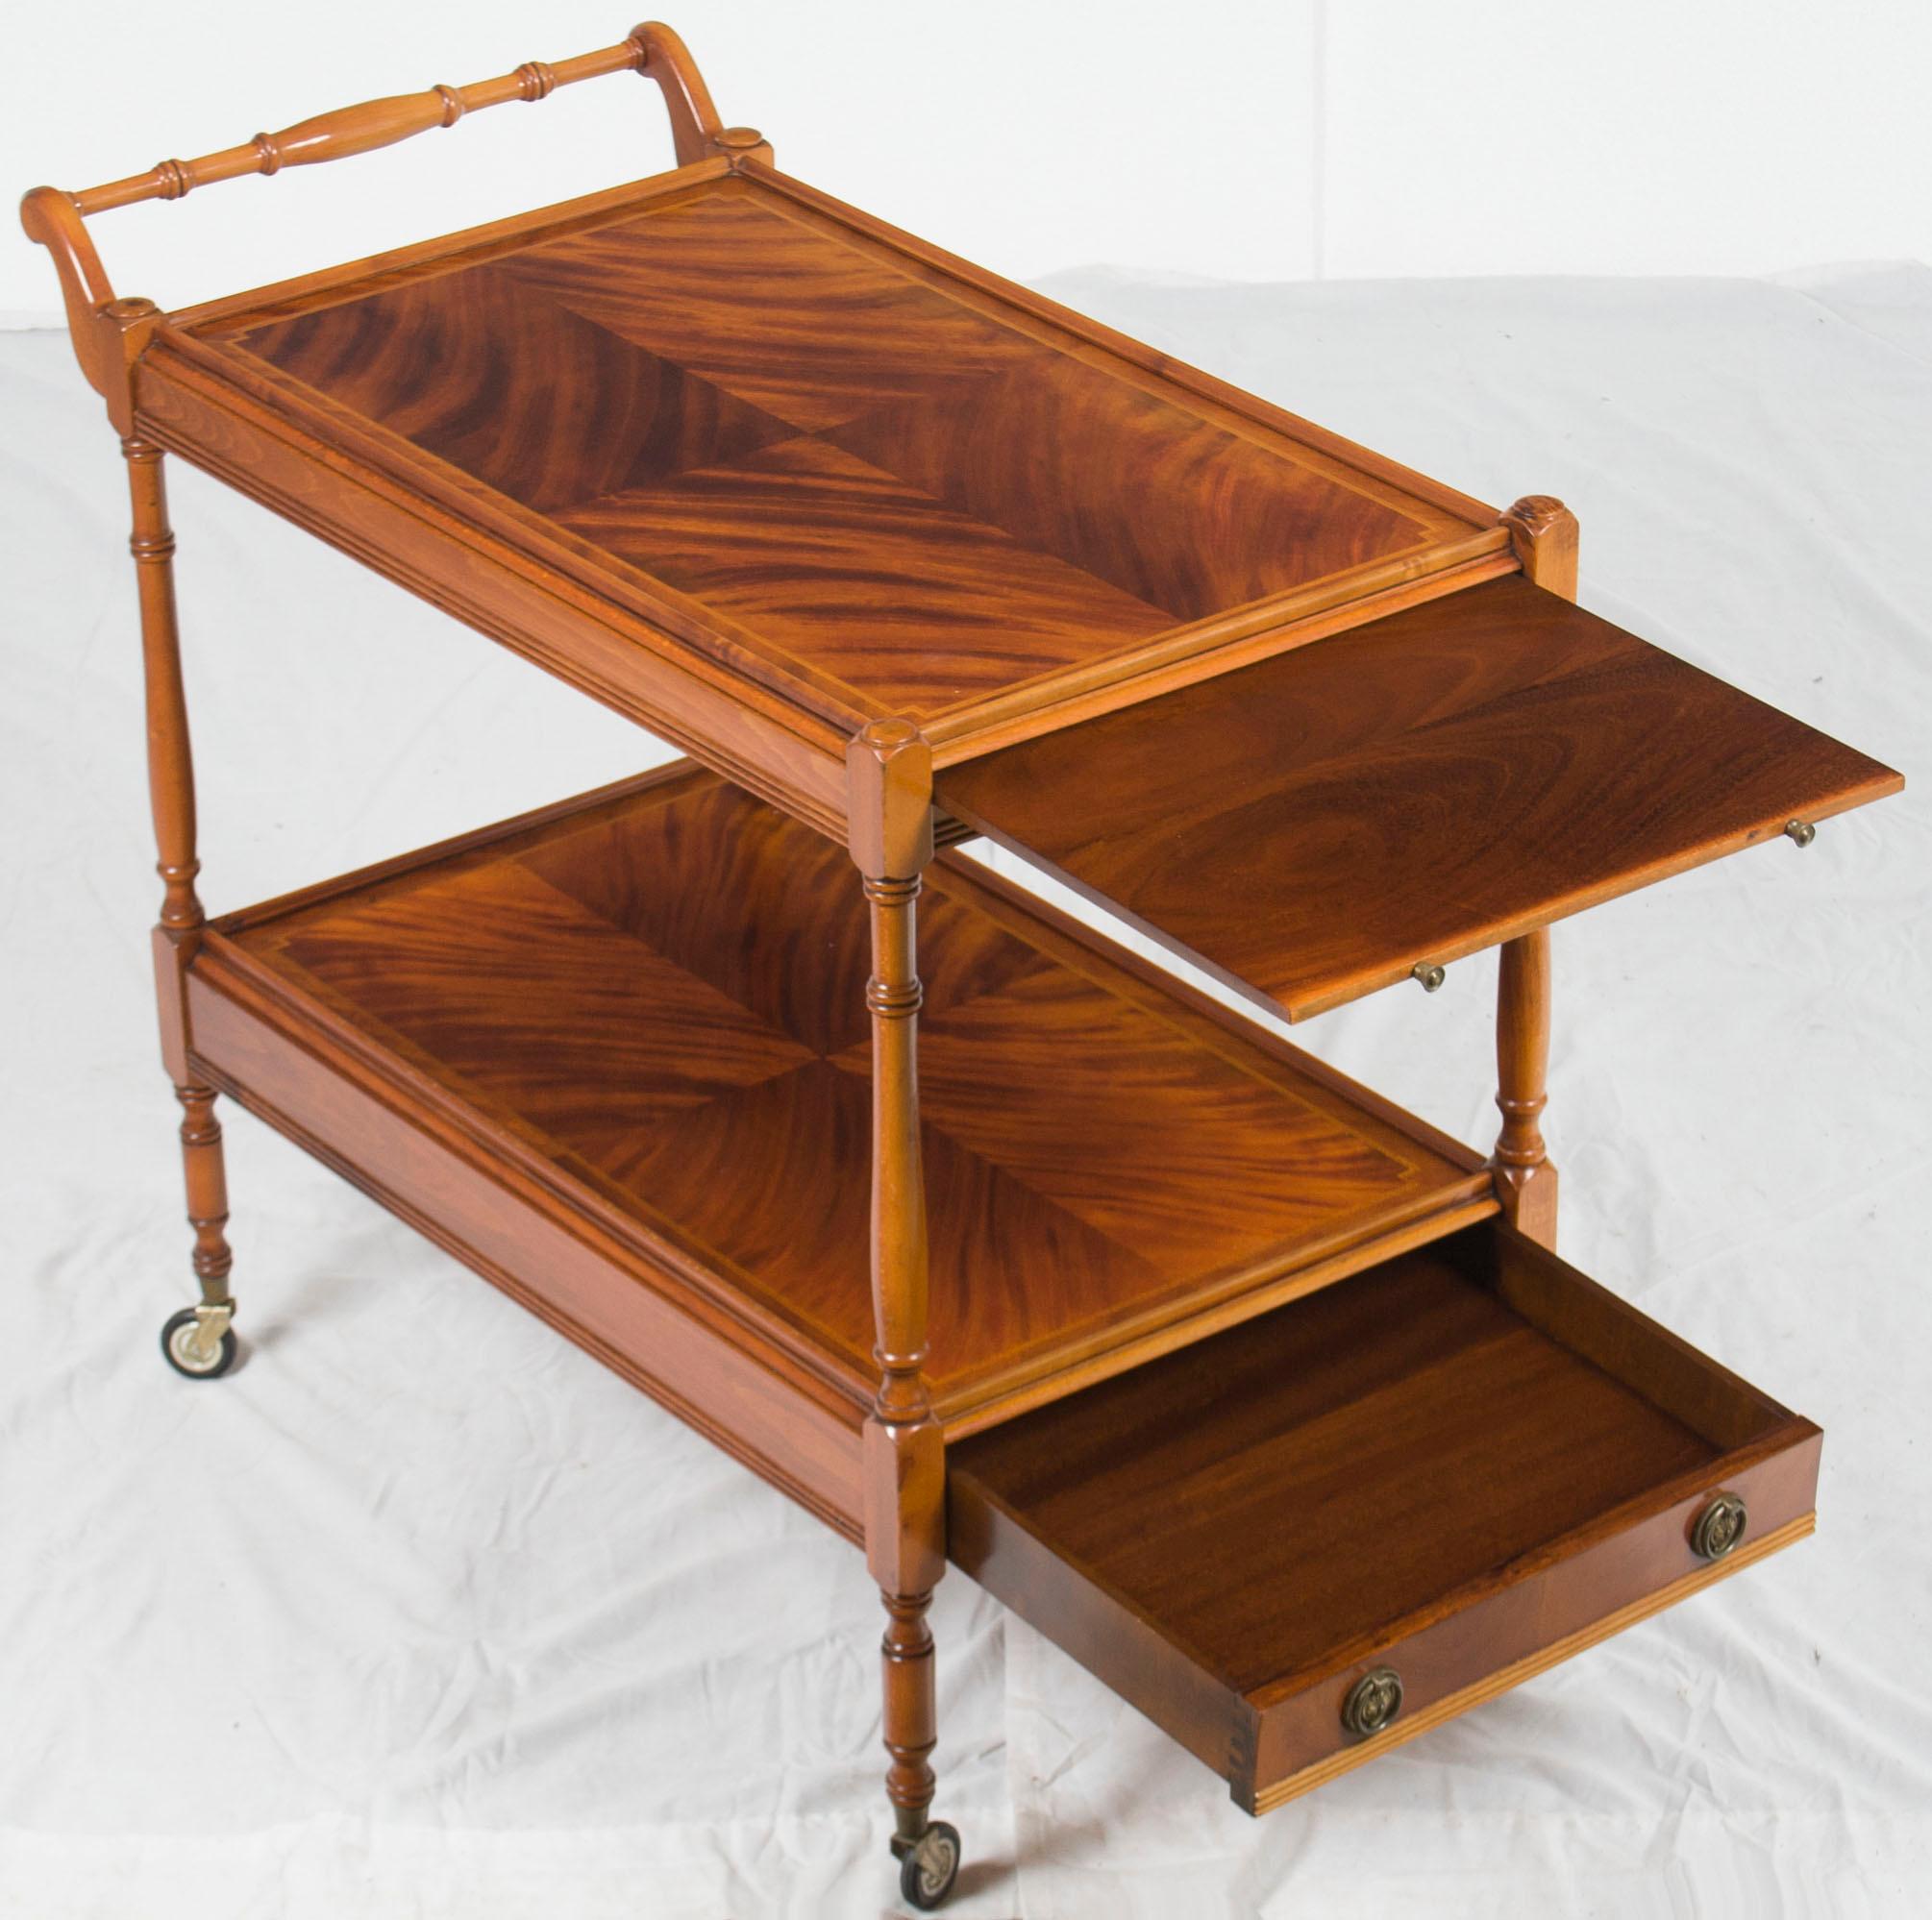 Regency Flame Mahogany Two-Tier Serving Trolley Tea Bar Cart with Drawer